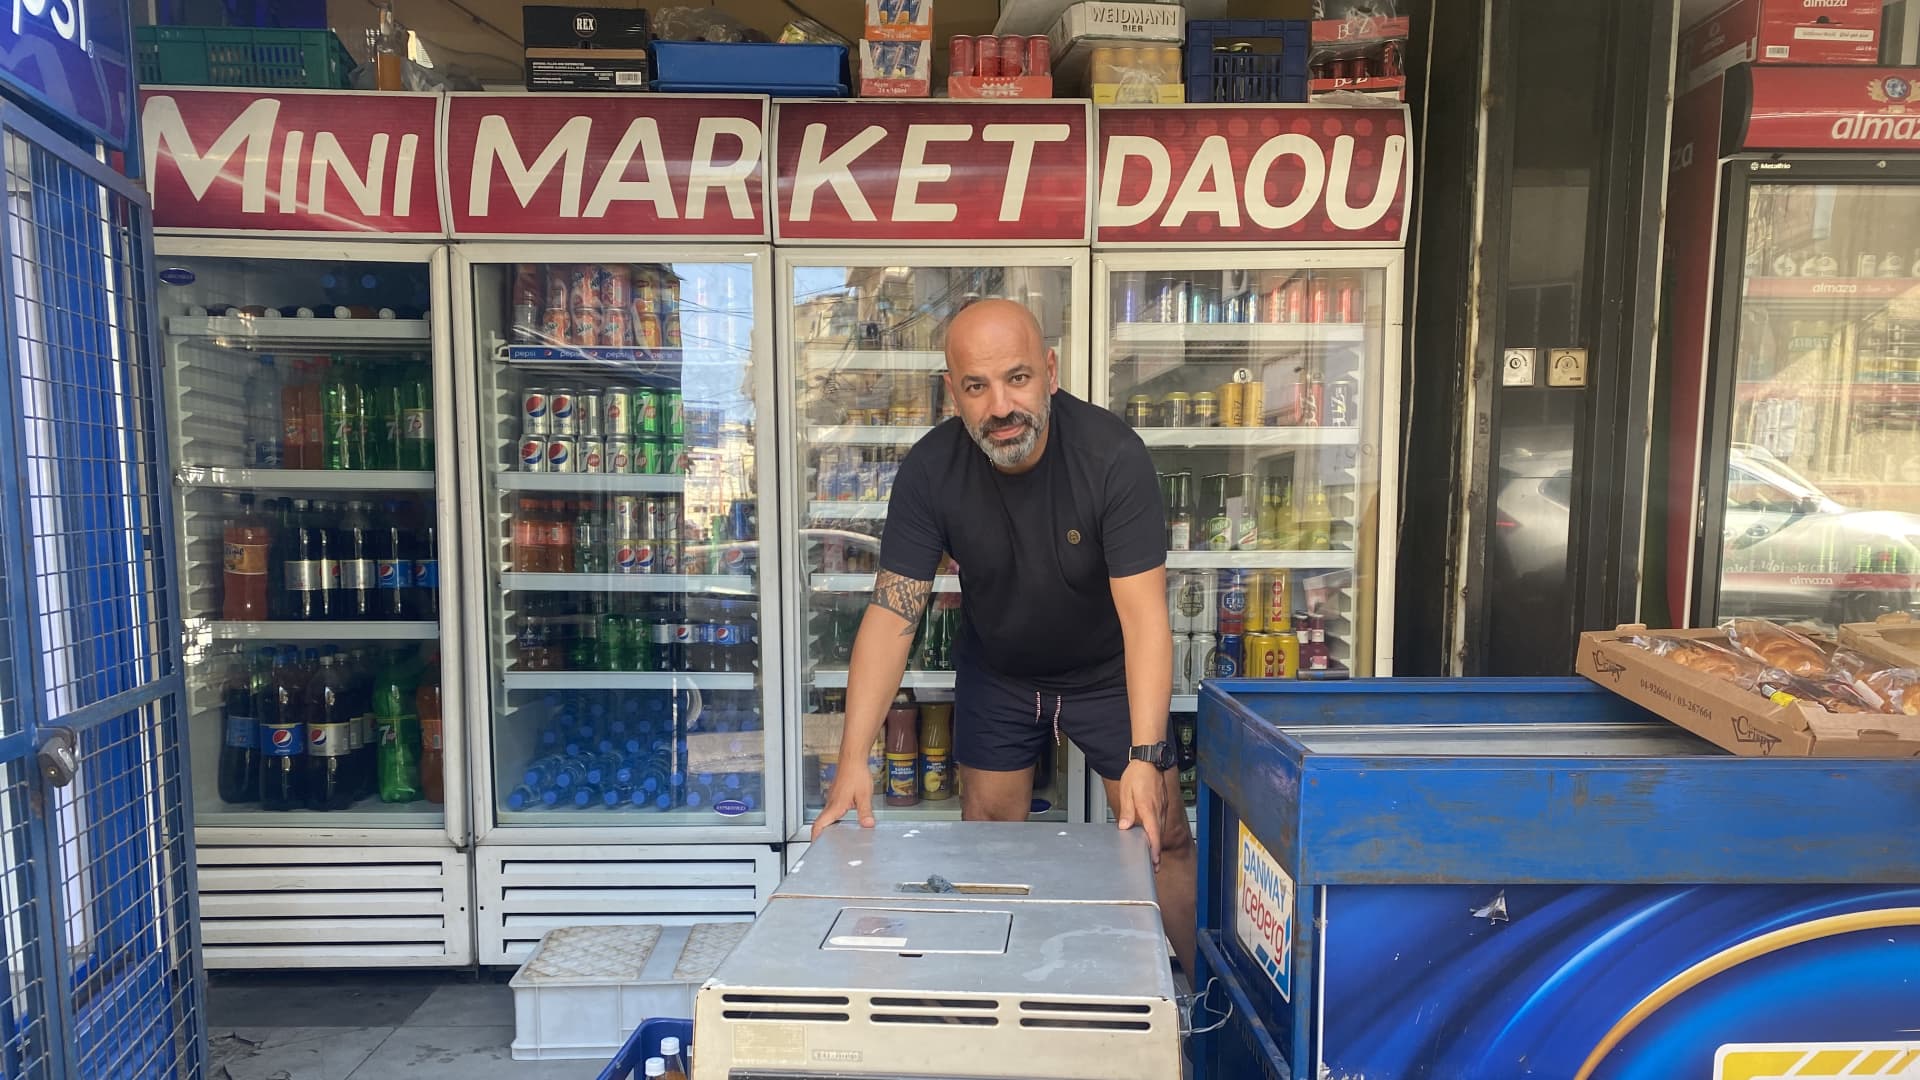 Rabih Daou, a shop owner in Beirut's Geitawy district, stands over his generator, the only means of electricity during hours-long daily power outages across Lebanon. The country's fuel crisis has made it harder to access fuel to run the generators. Beirut, Lebanon, September 24, 2021.